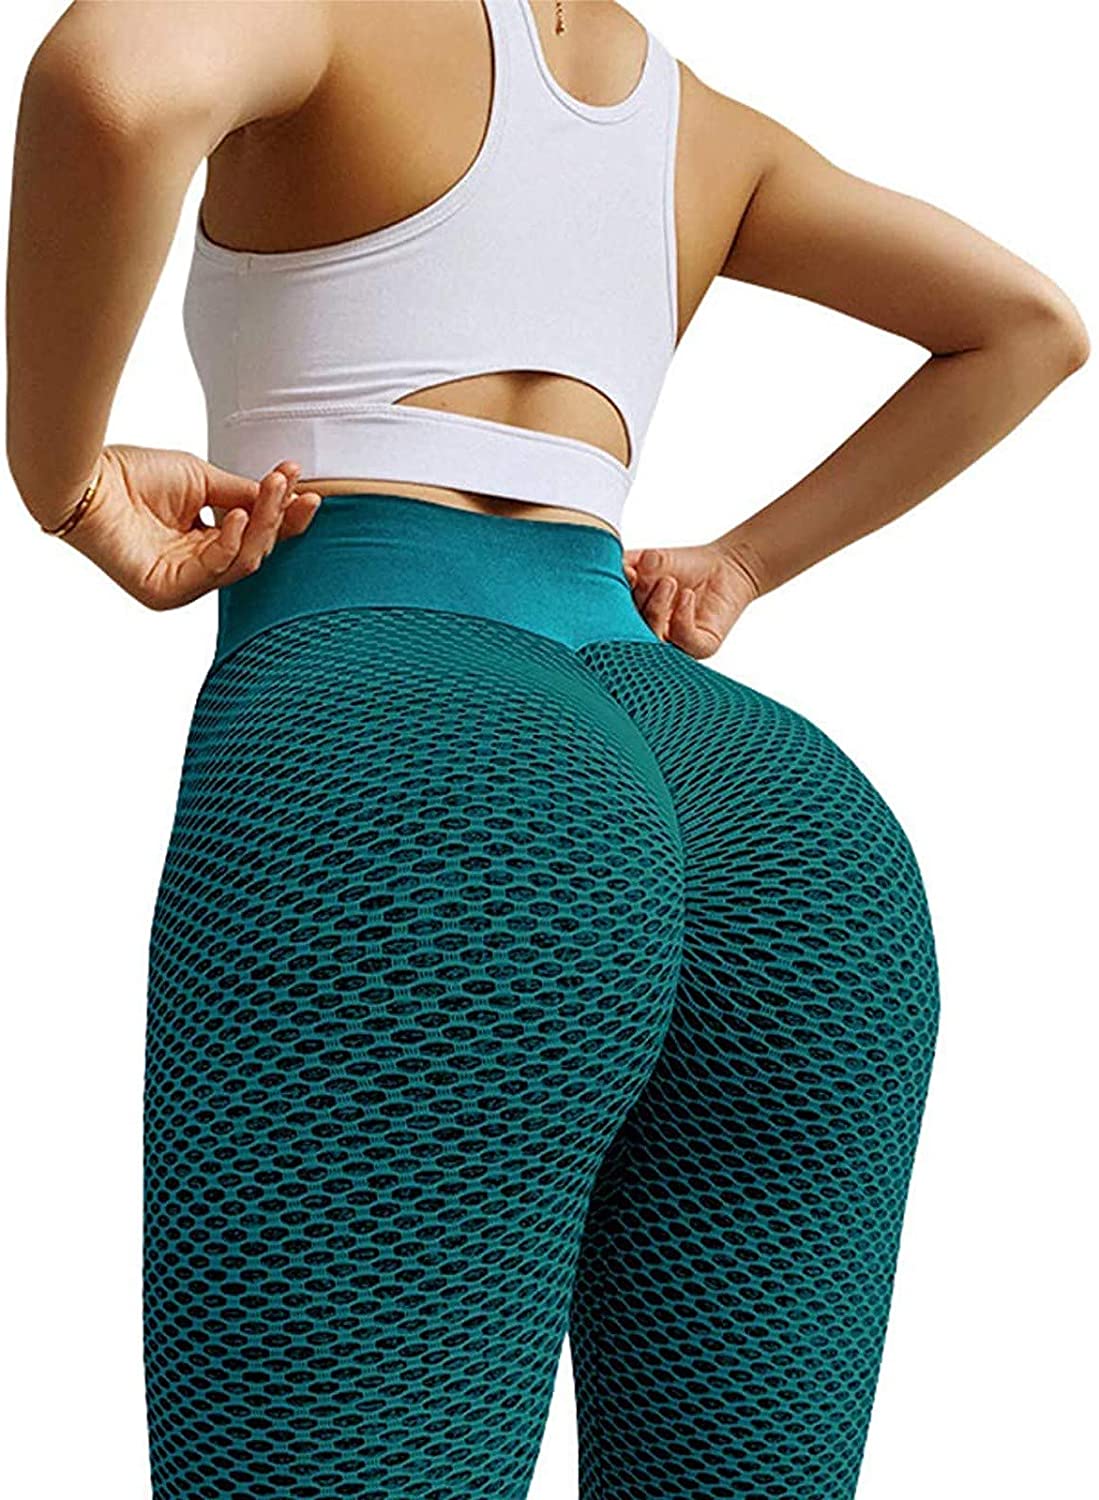 The best leggings in Australia: From butt-lifting to sustainable